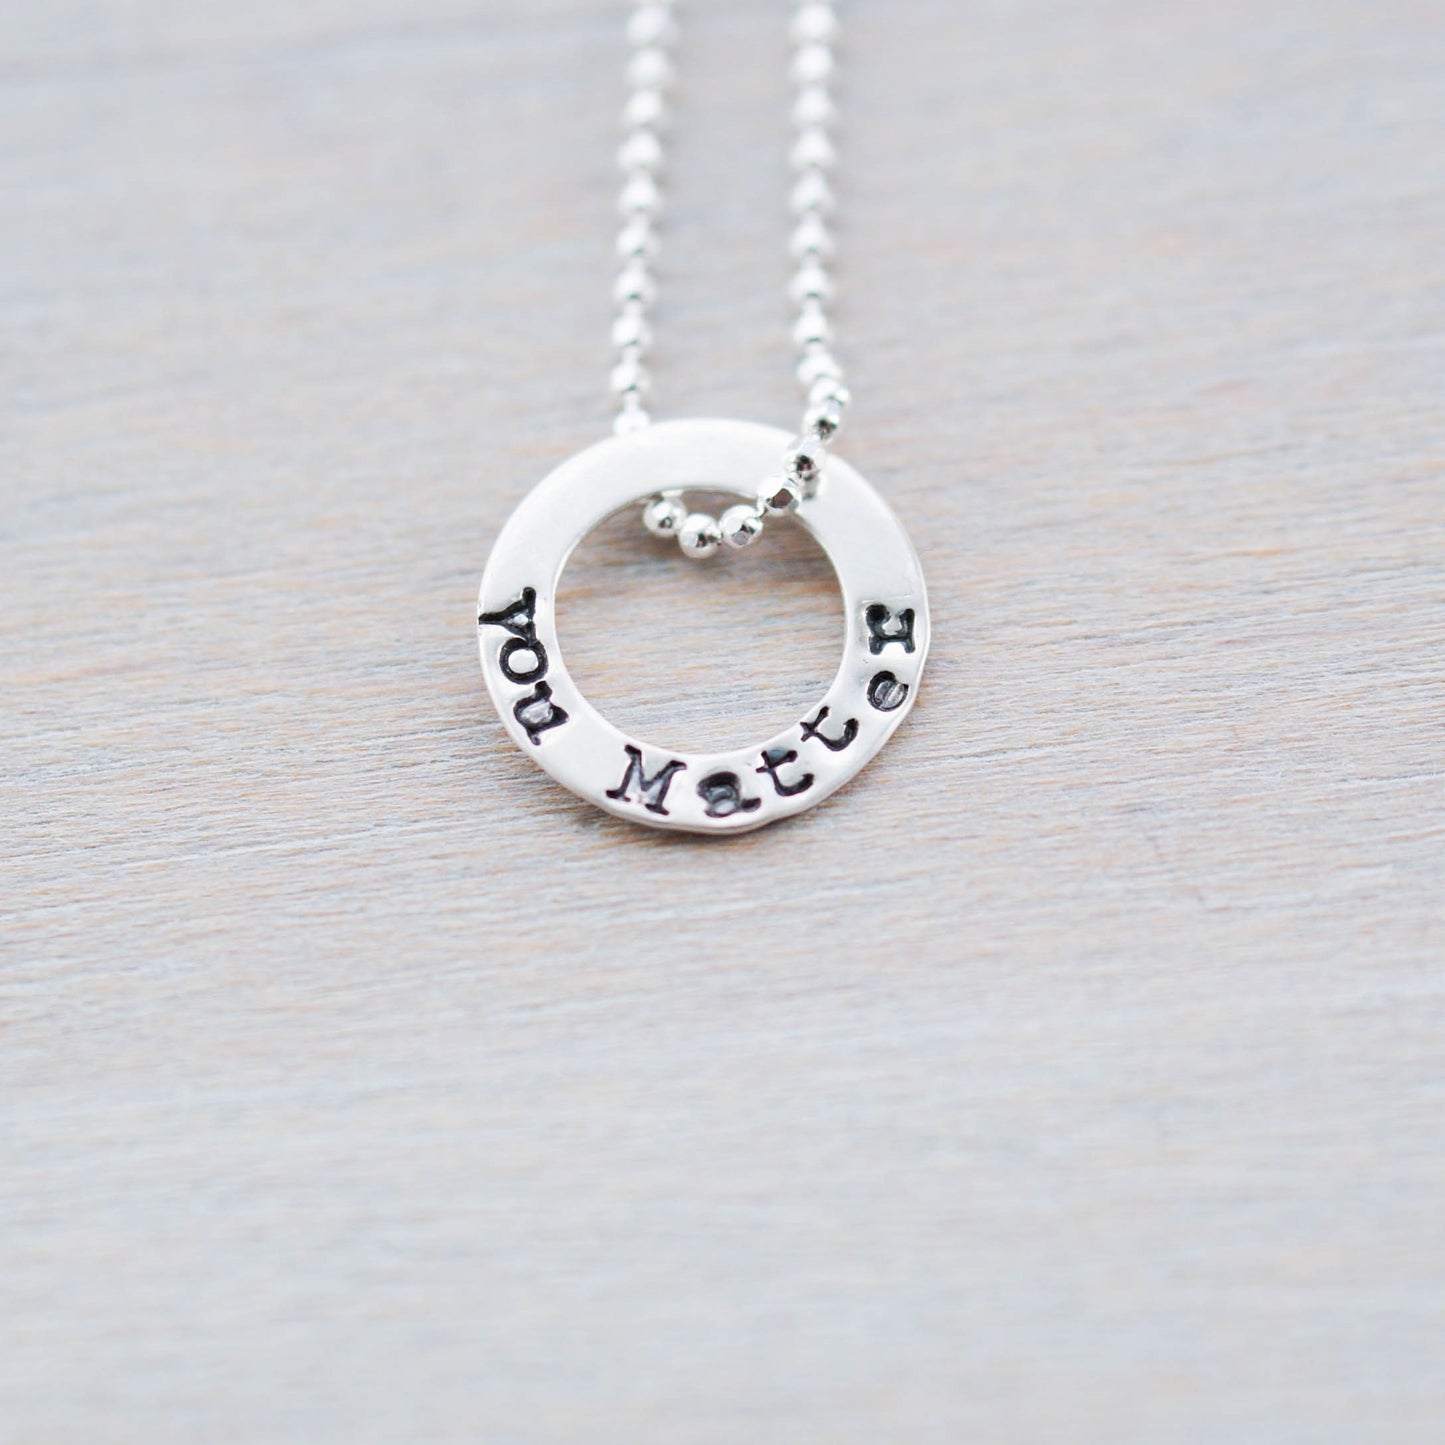 Tiny circle necklace in sterling silver stamped with You Matter